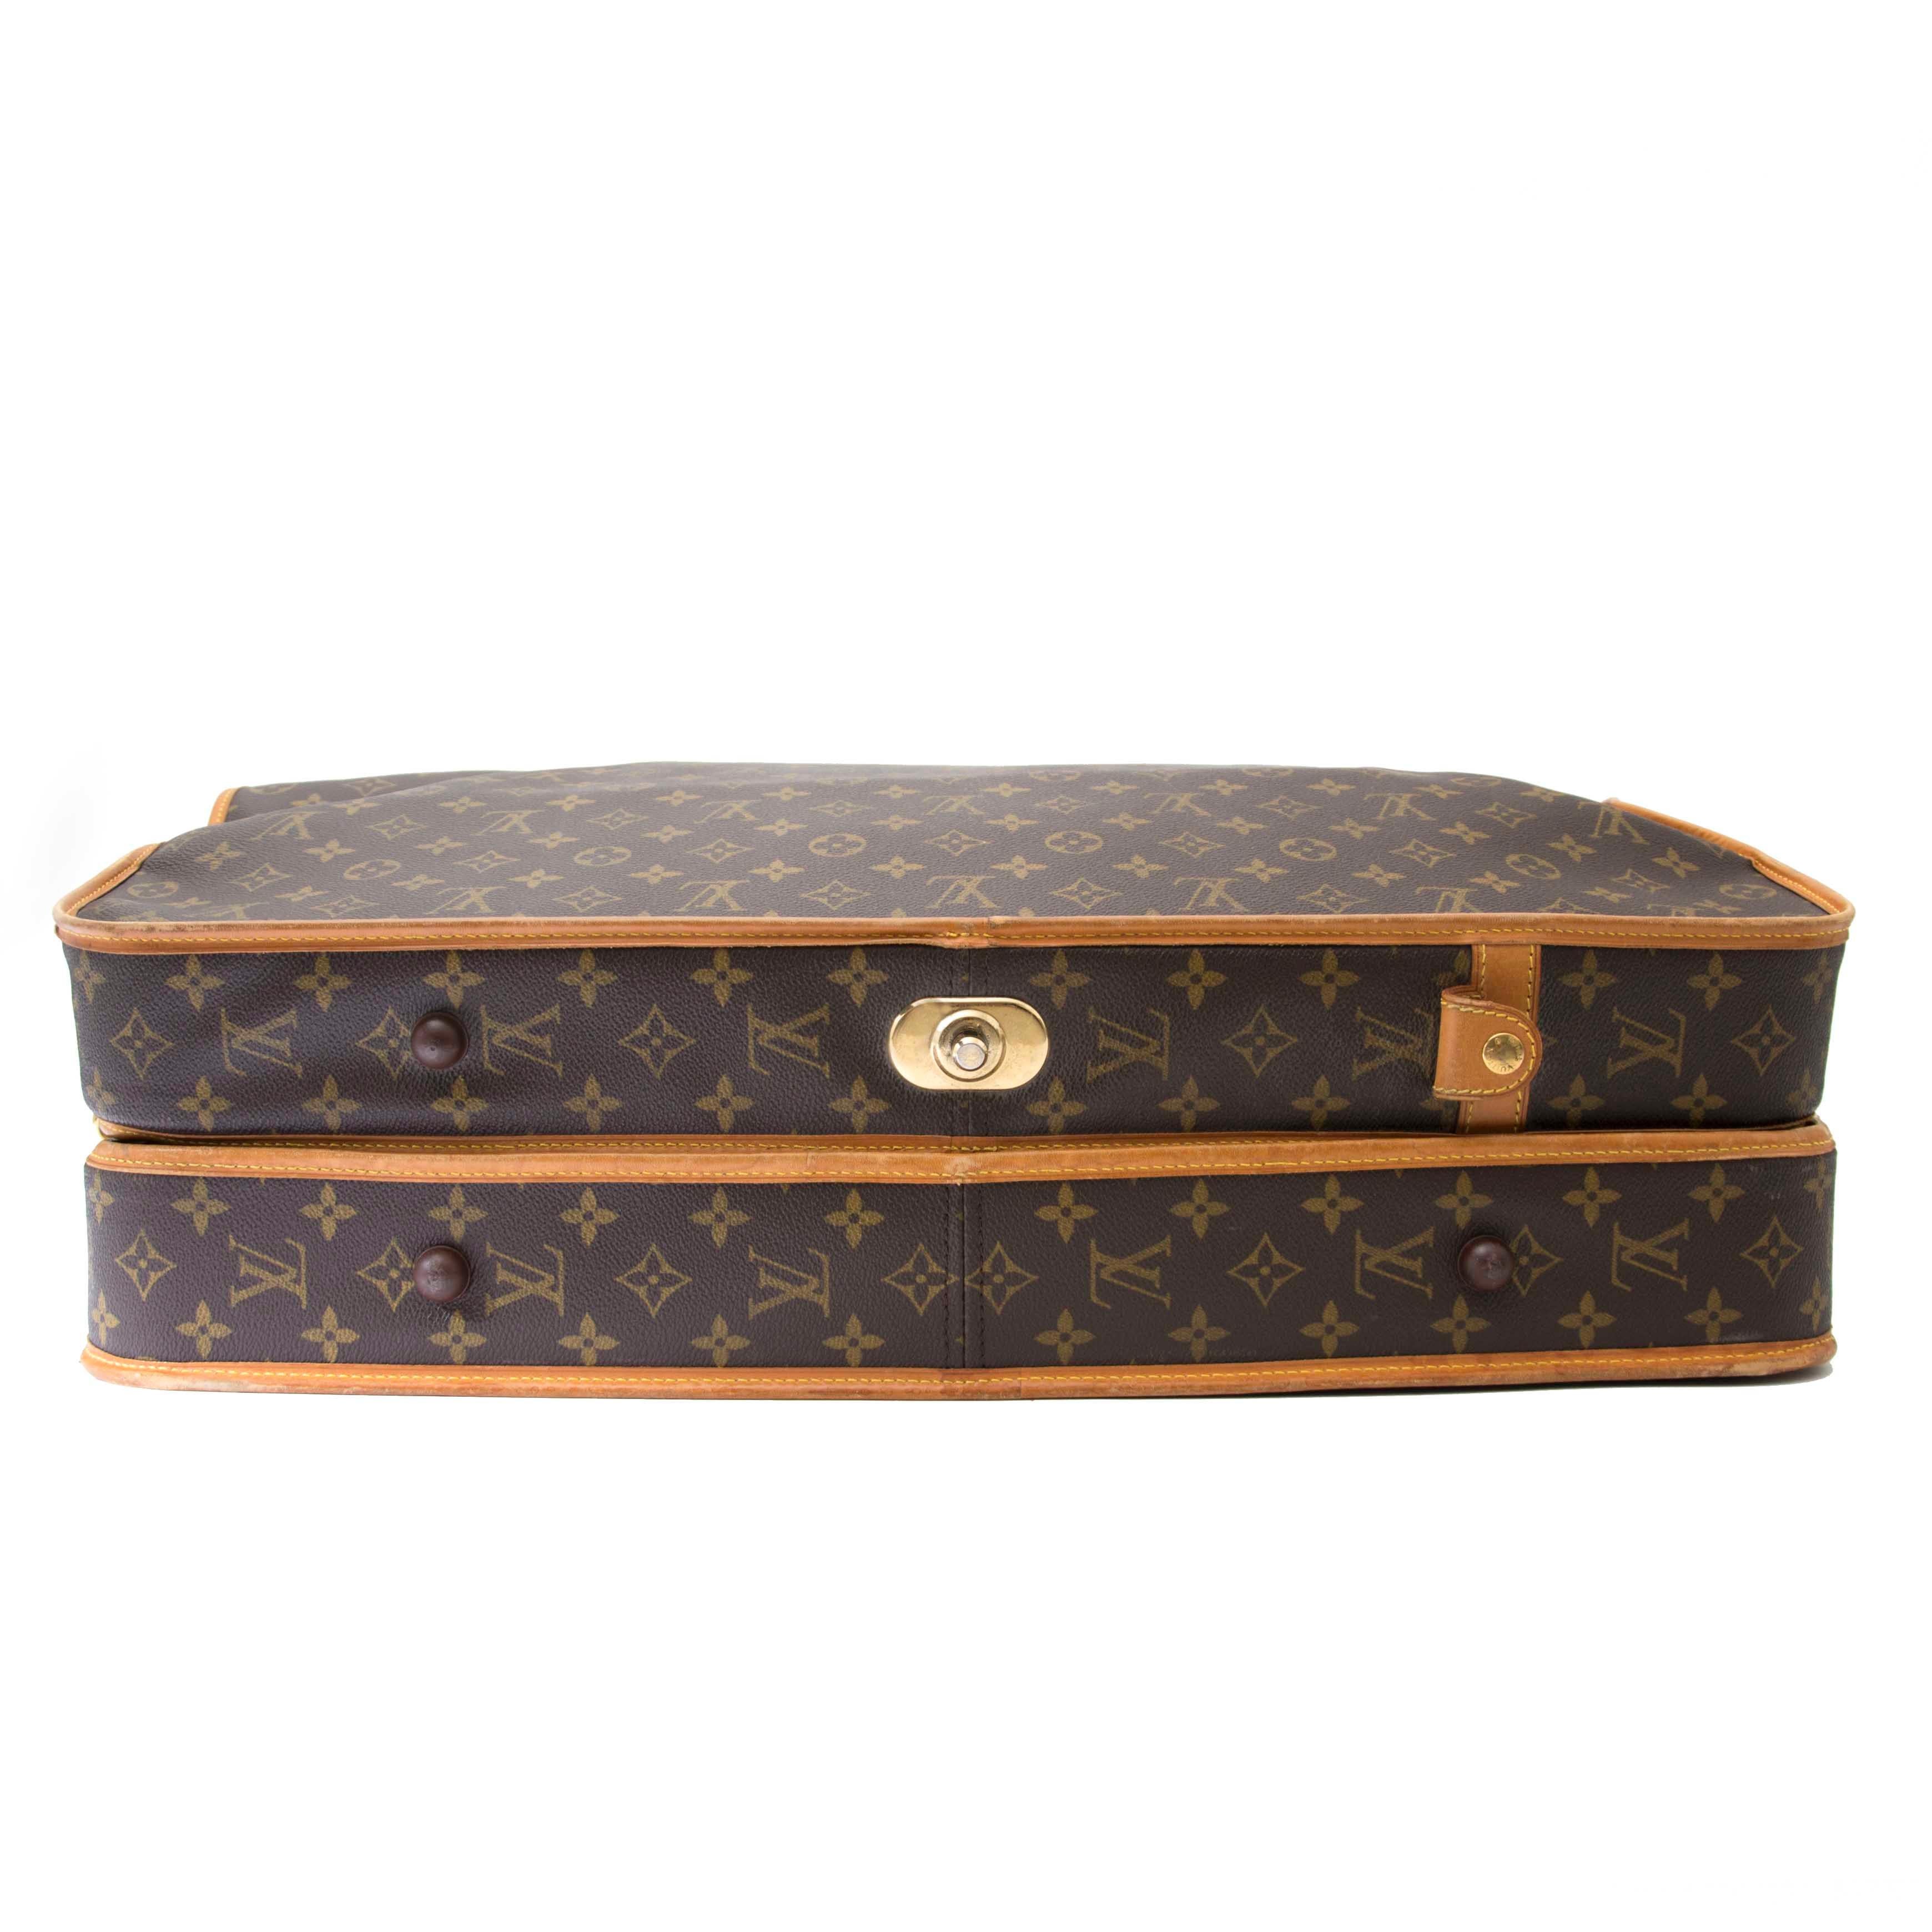 Good preloved condition

Louis Vuitton Monogram Canvas Portable Bandouliere Garment Bag

This Louis Vuitton Monogram Canvas Portable Bandouliere Garment Bag is a functional and iconic accessory for the stylish traveller with wanderlust. It has